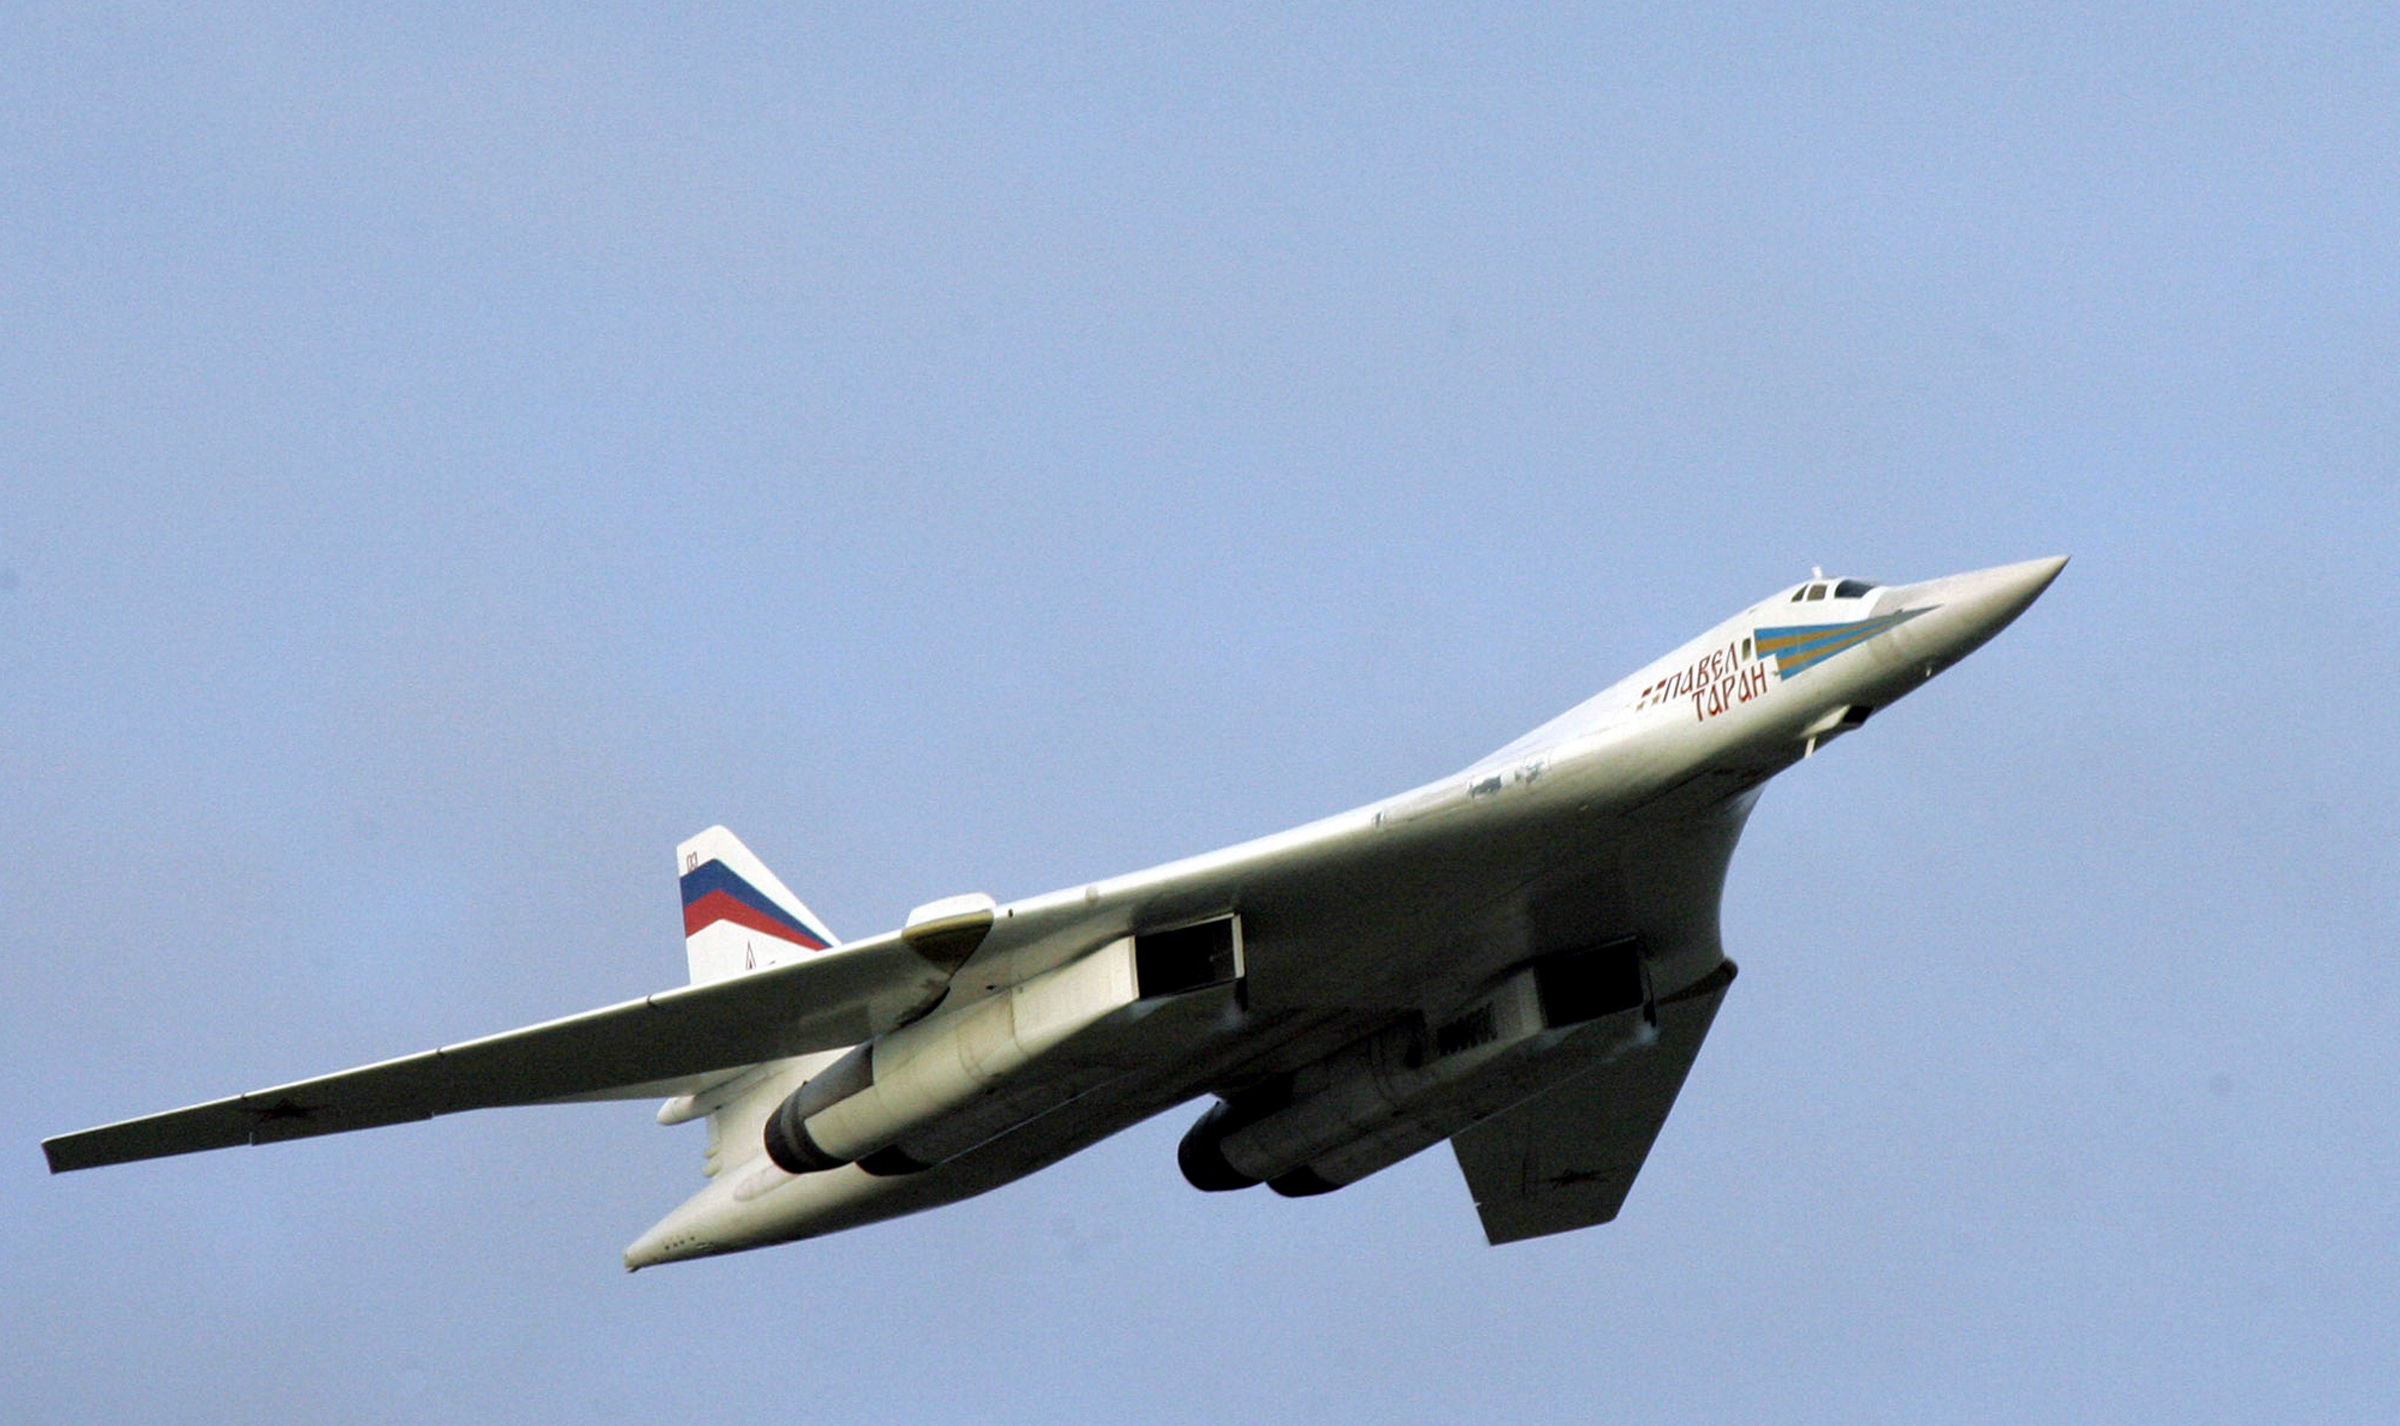 Russian nuclear-capable bombers fly over Caribbean Sea